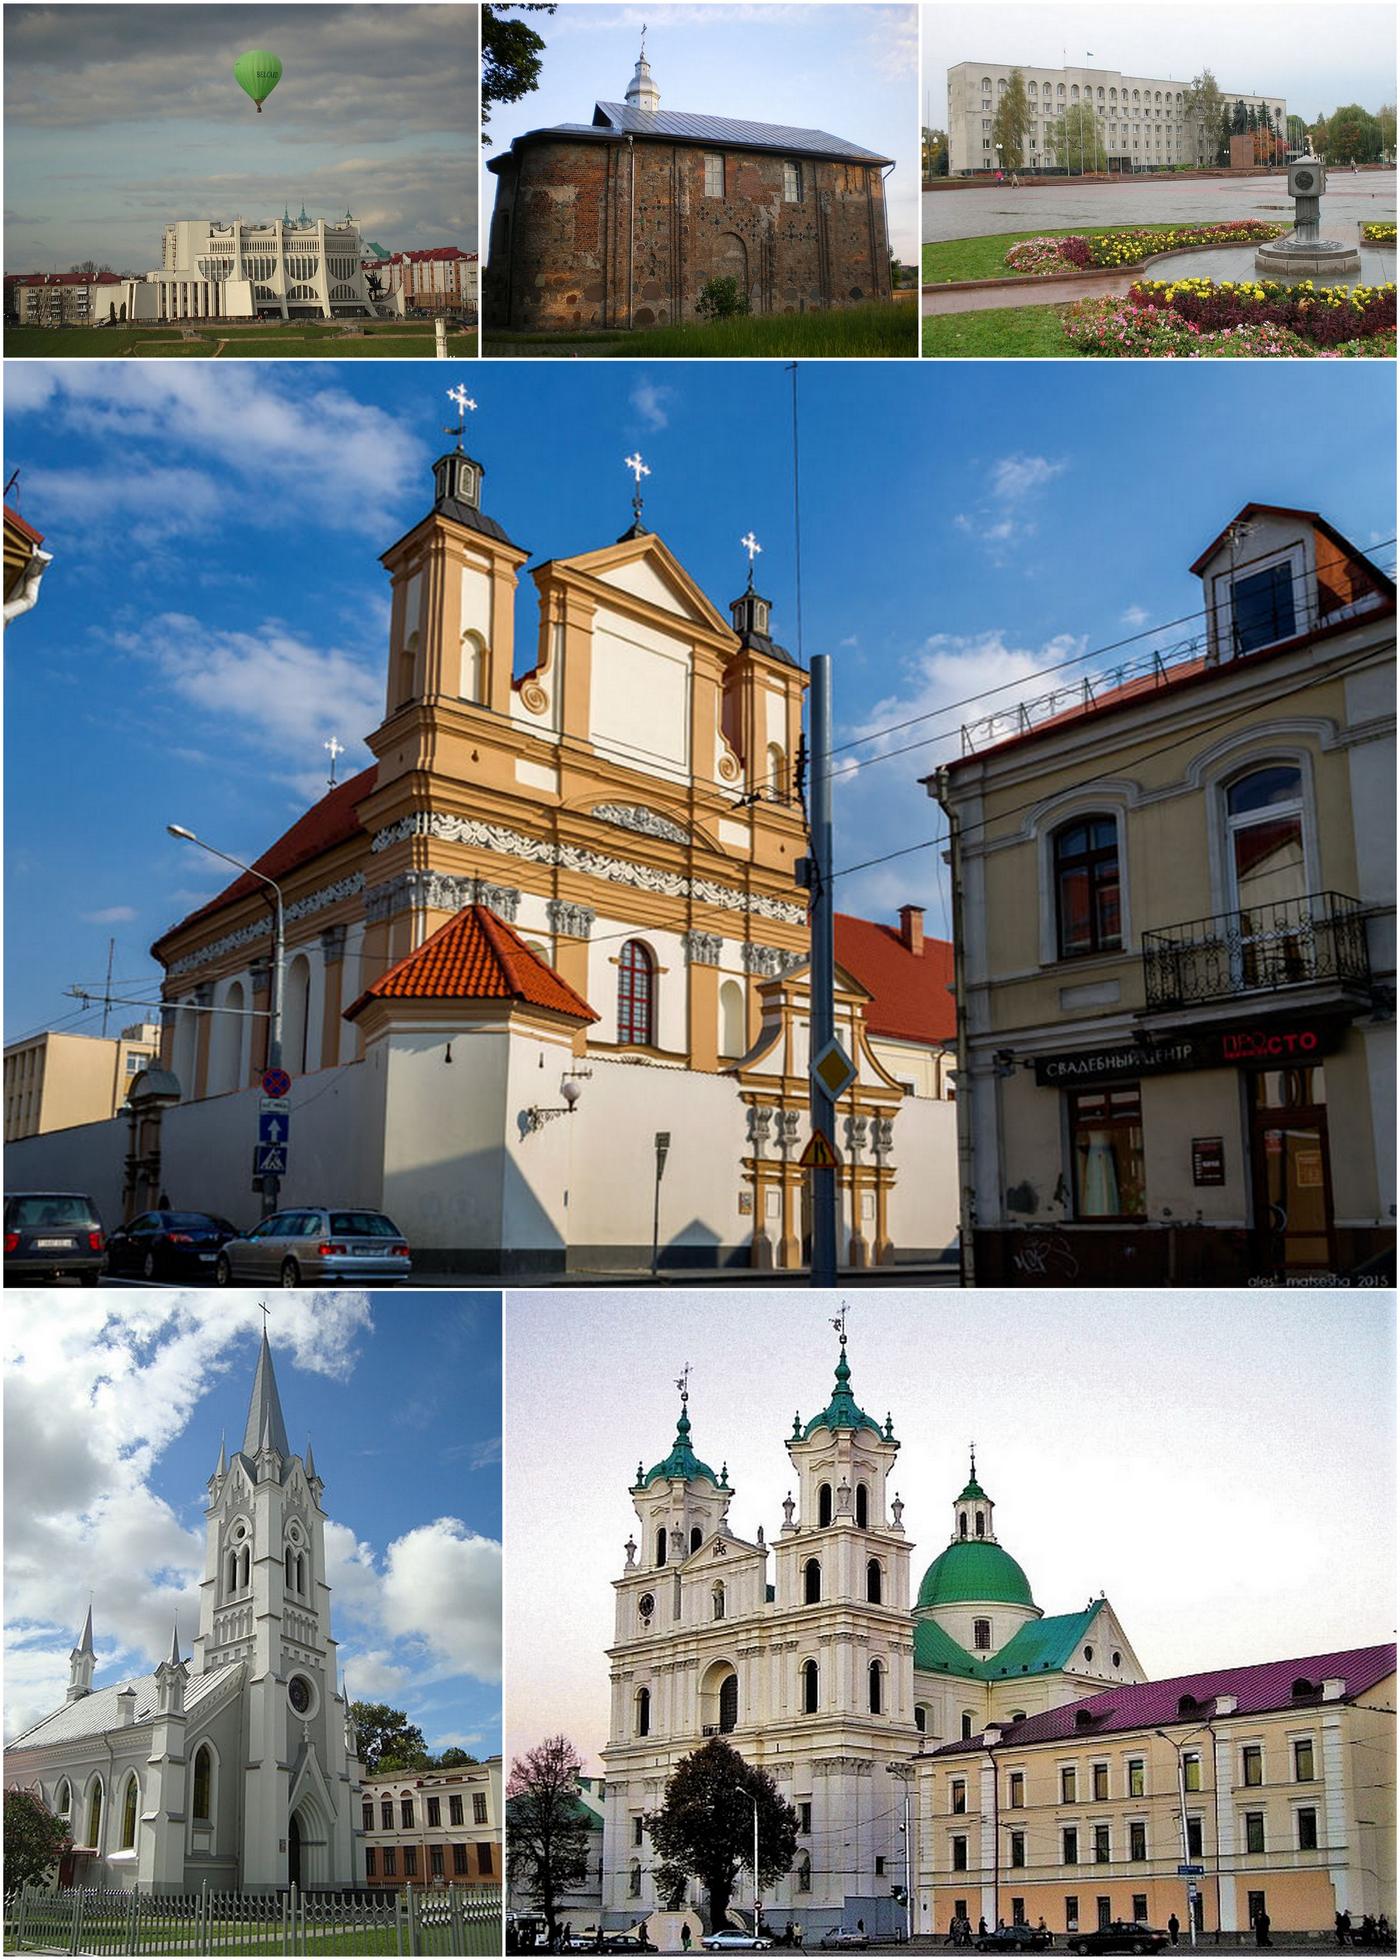 Hrodna: Pure history and culture